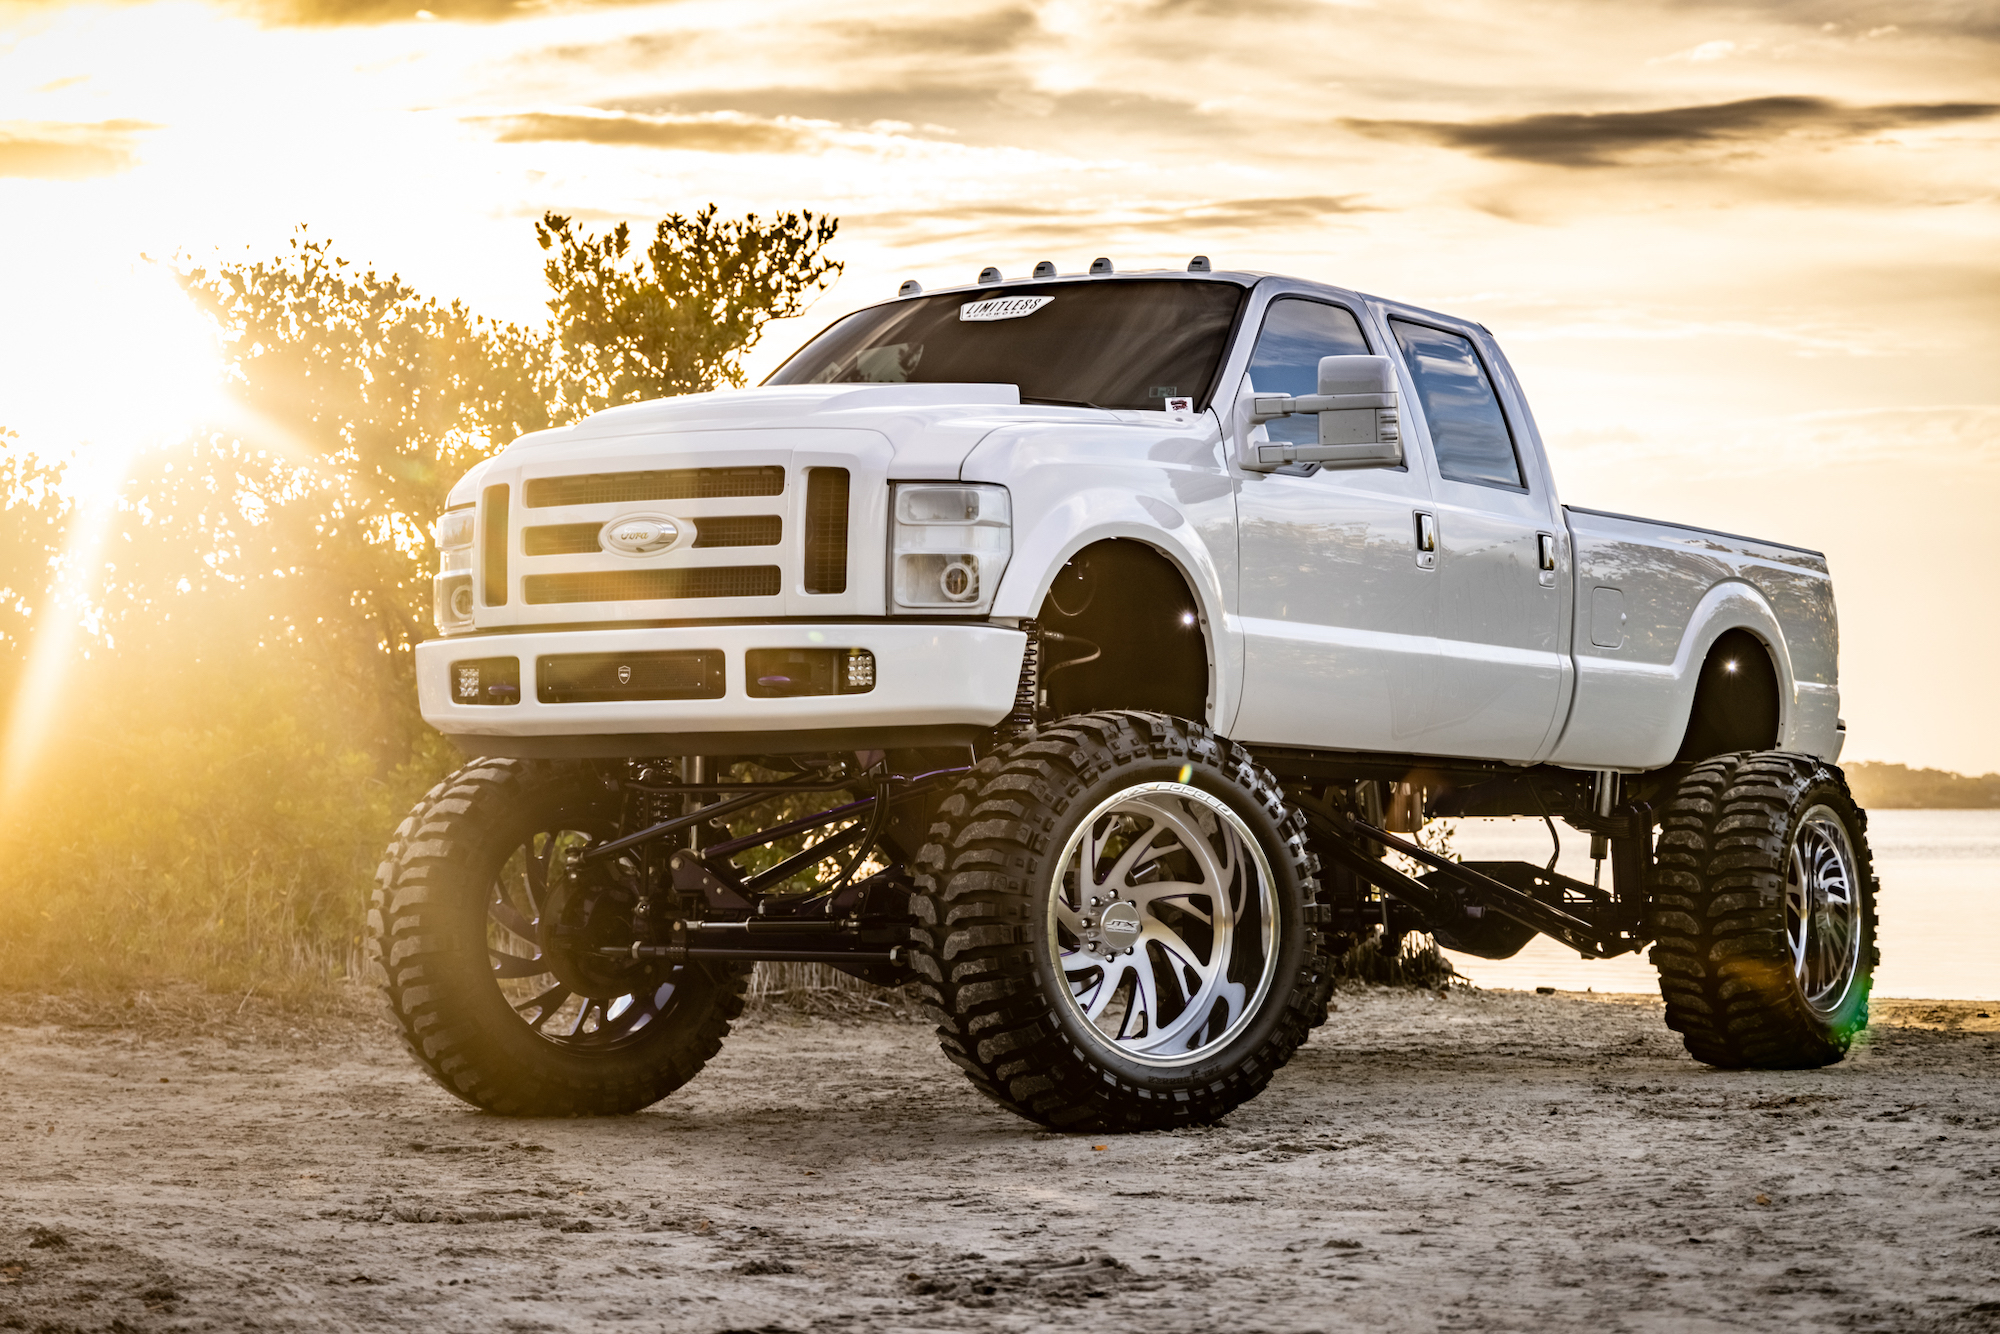 Cool looking lifted truck